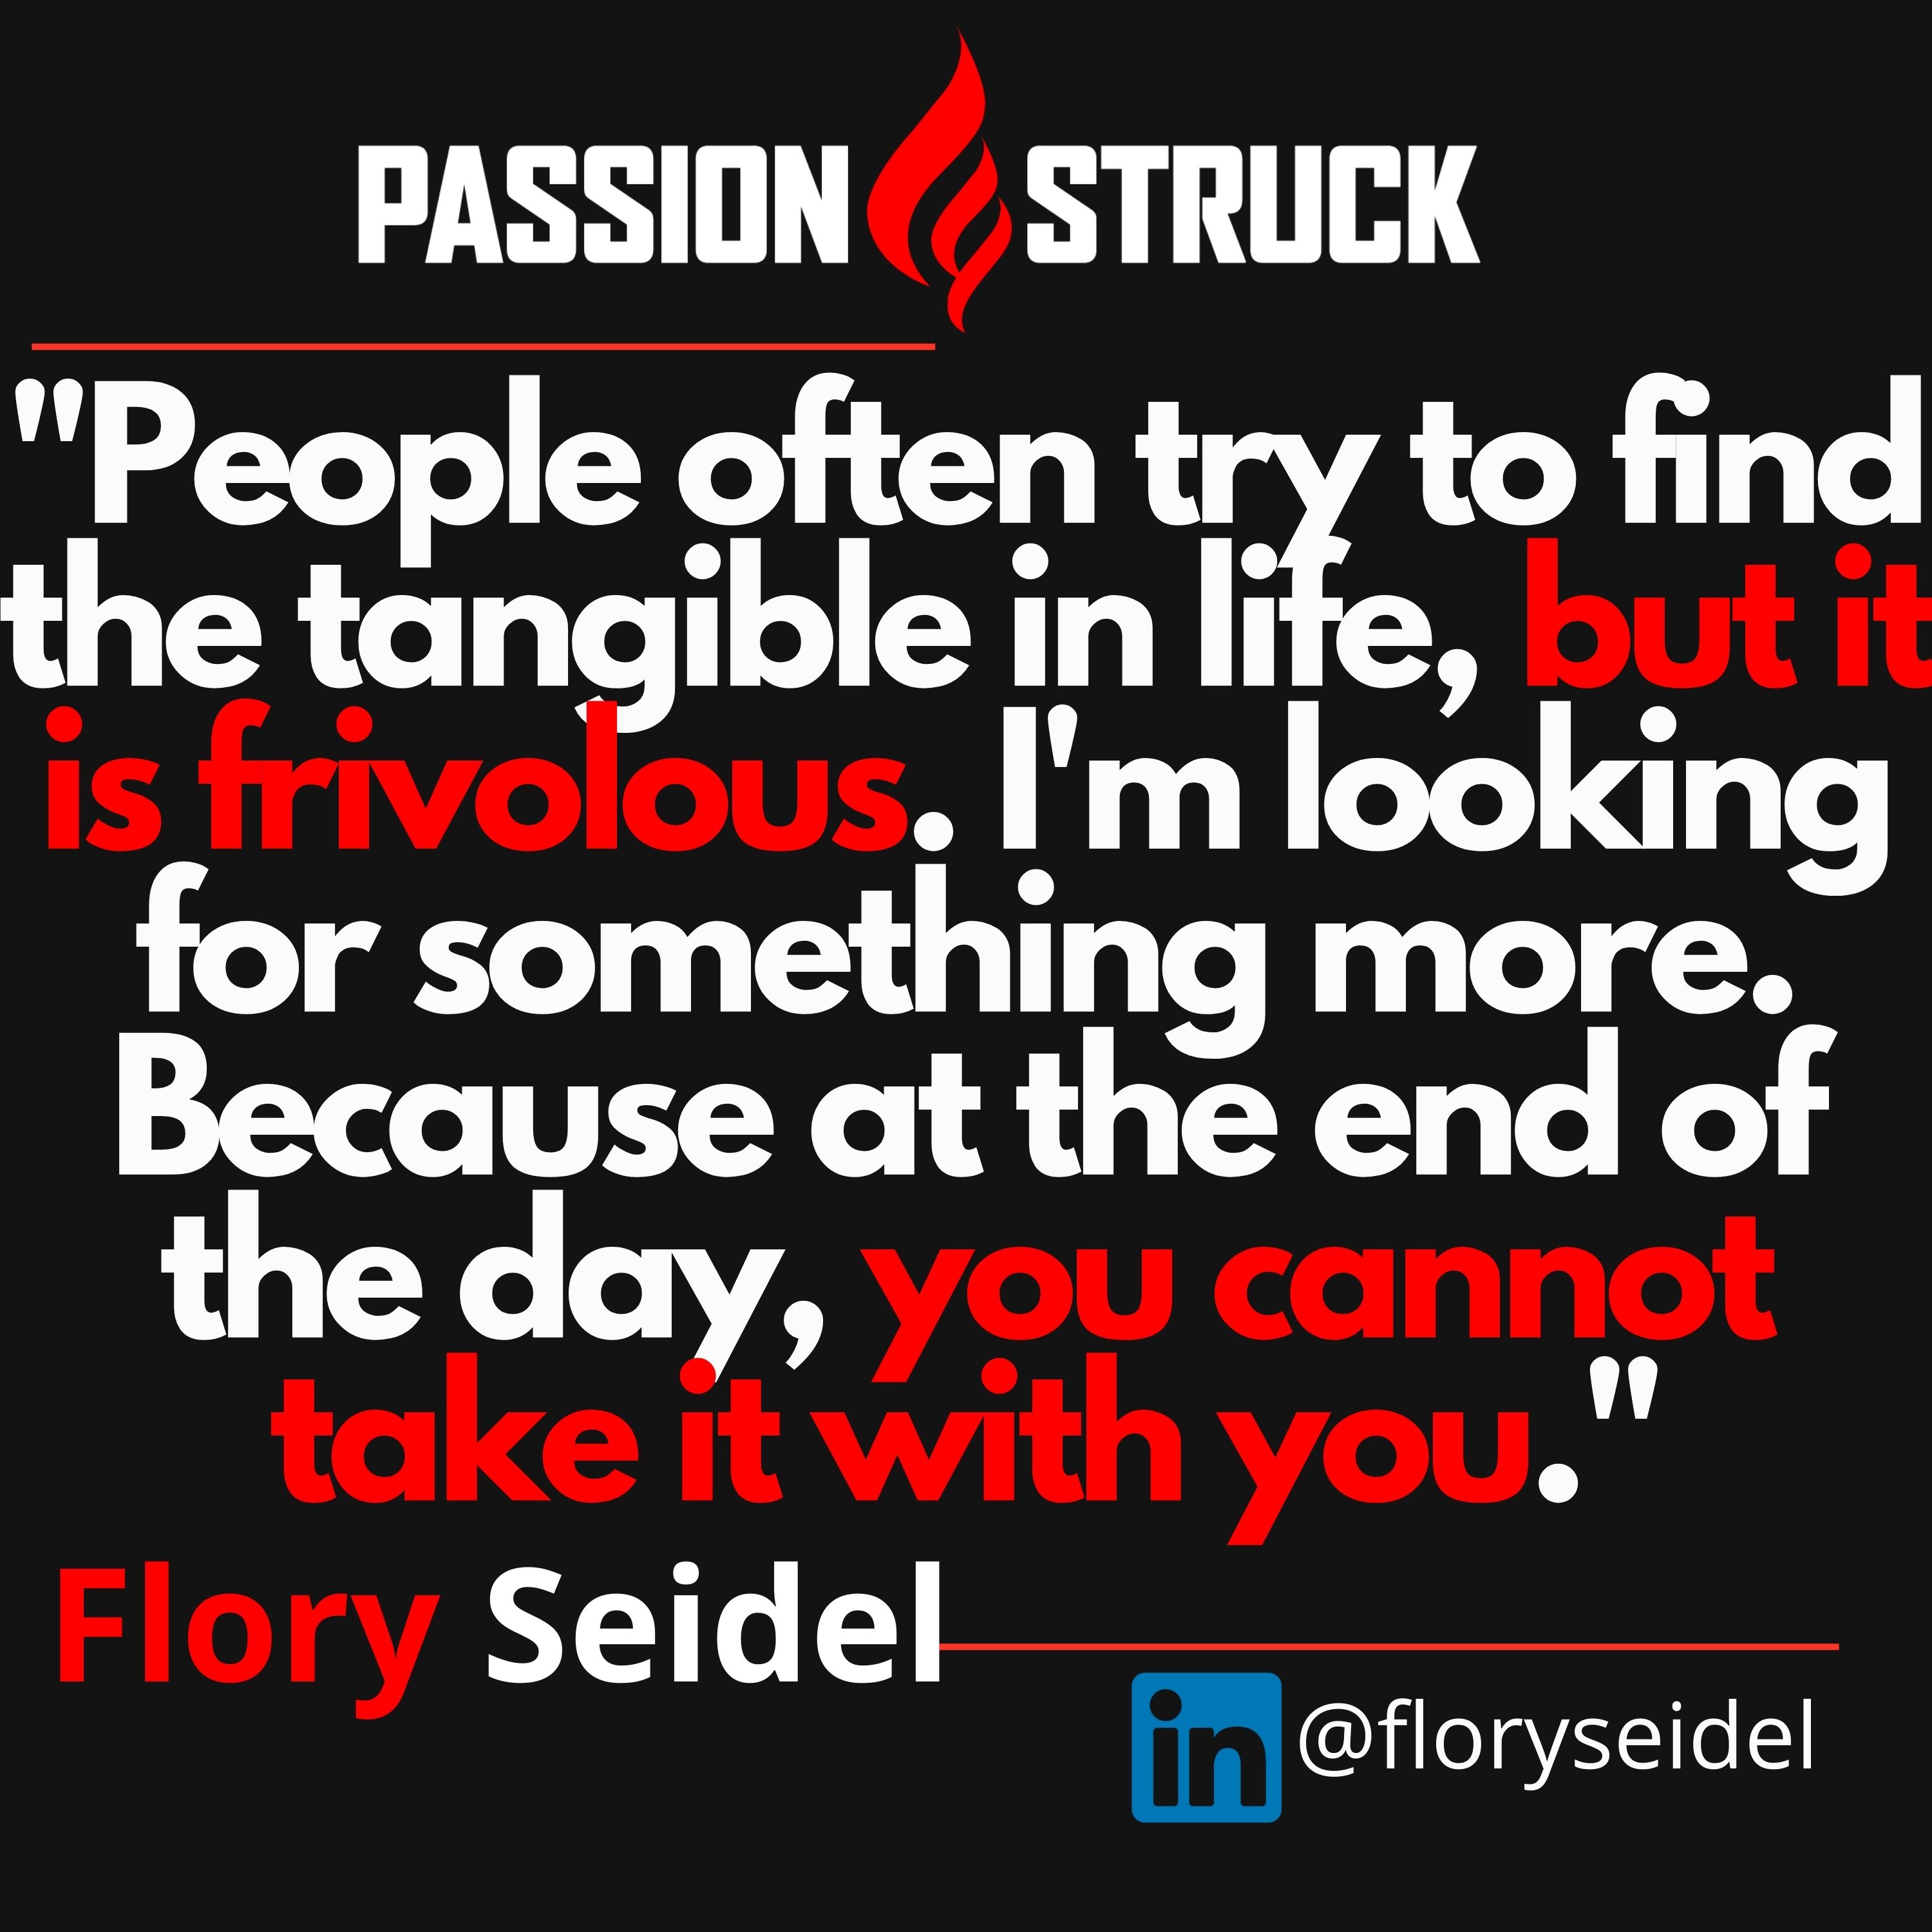 Flory Seidel Quote about intangibles on the passion struck podcast